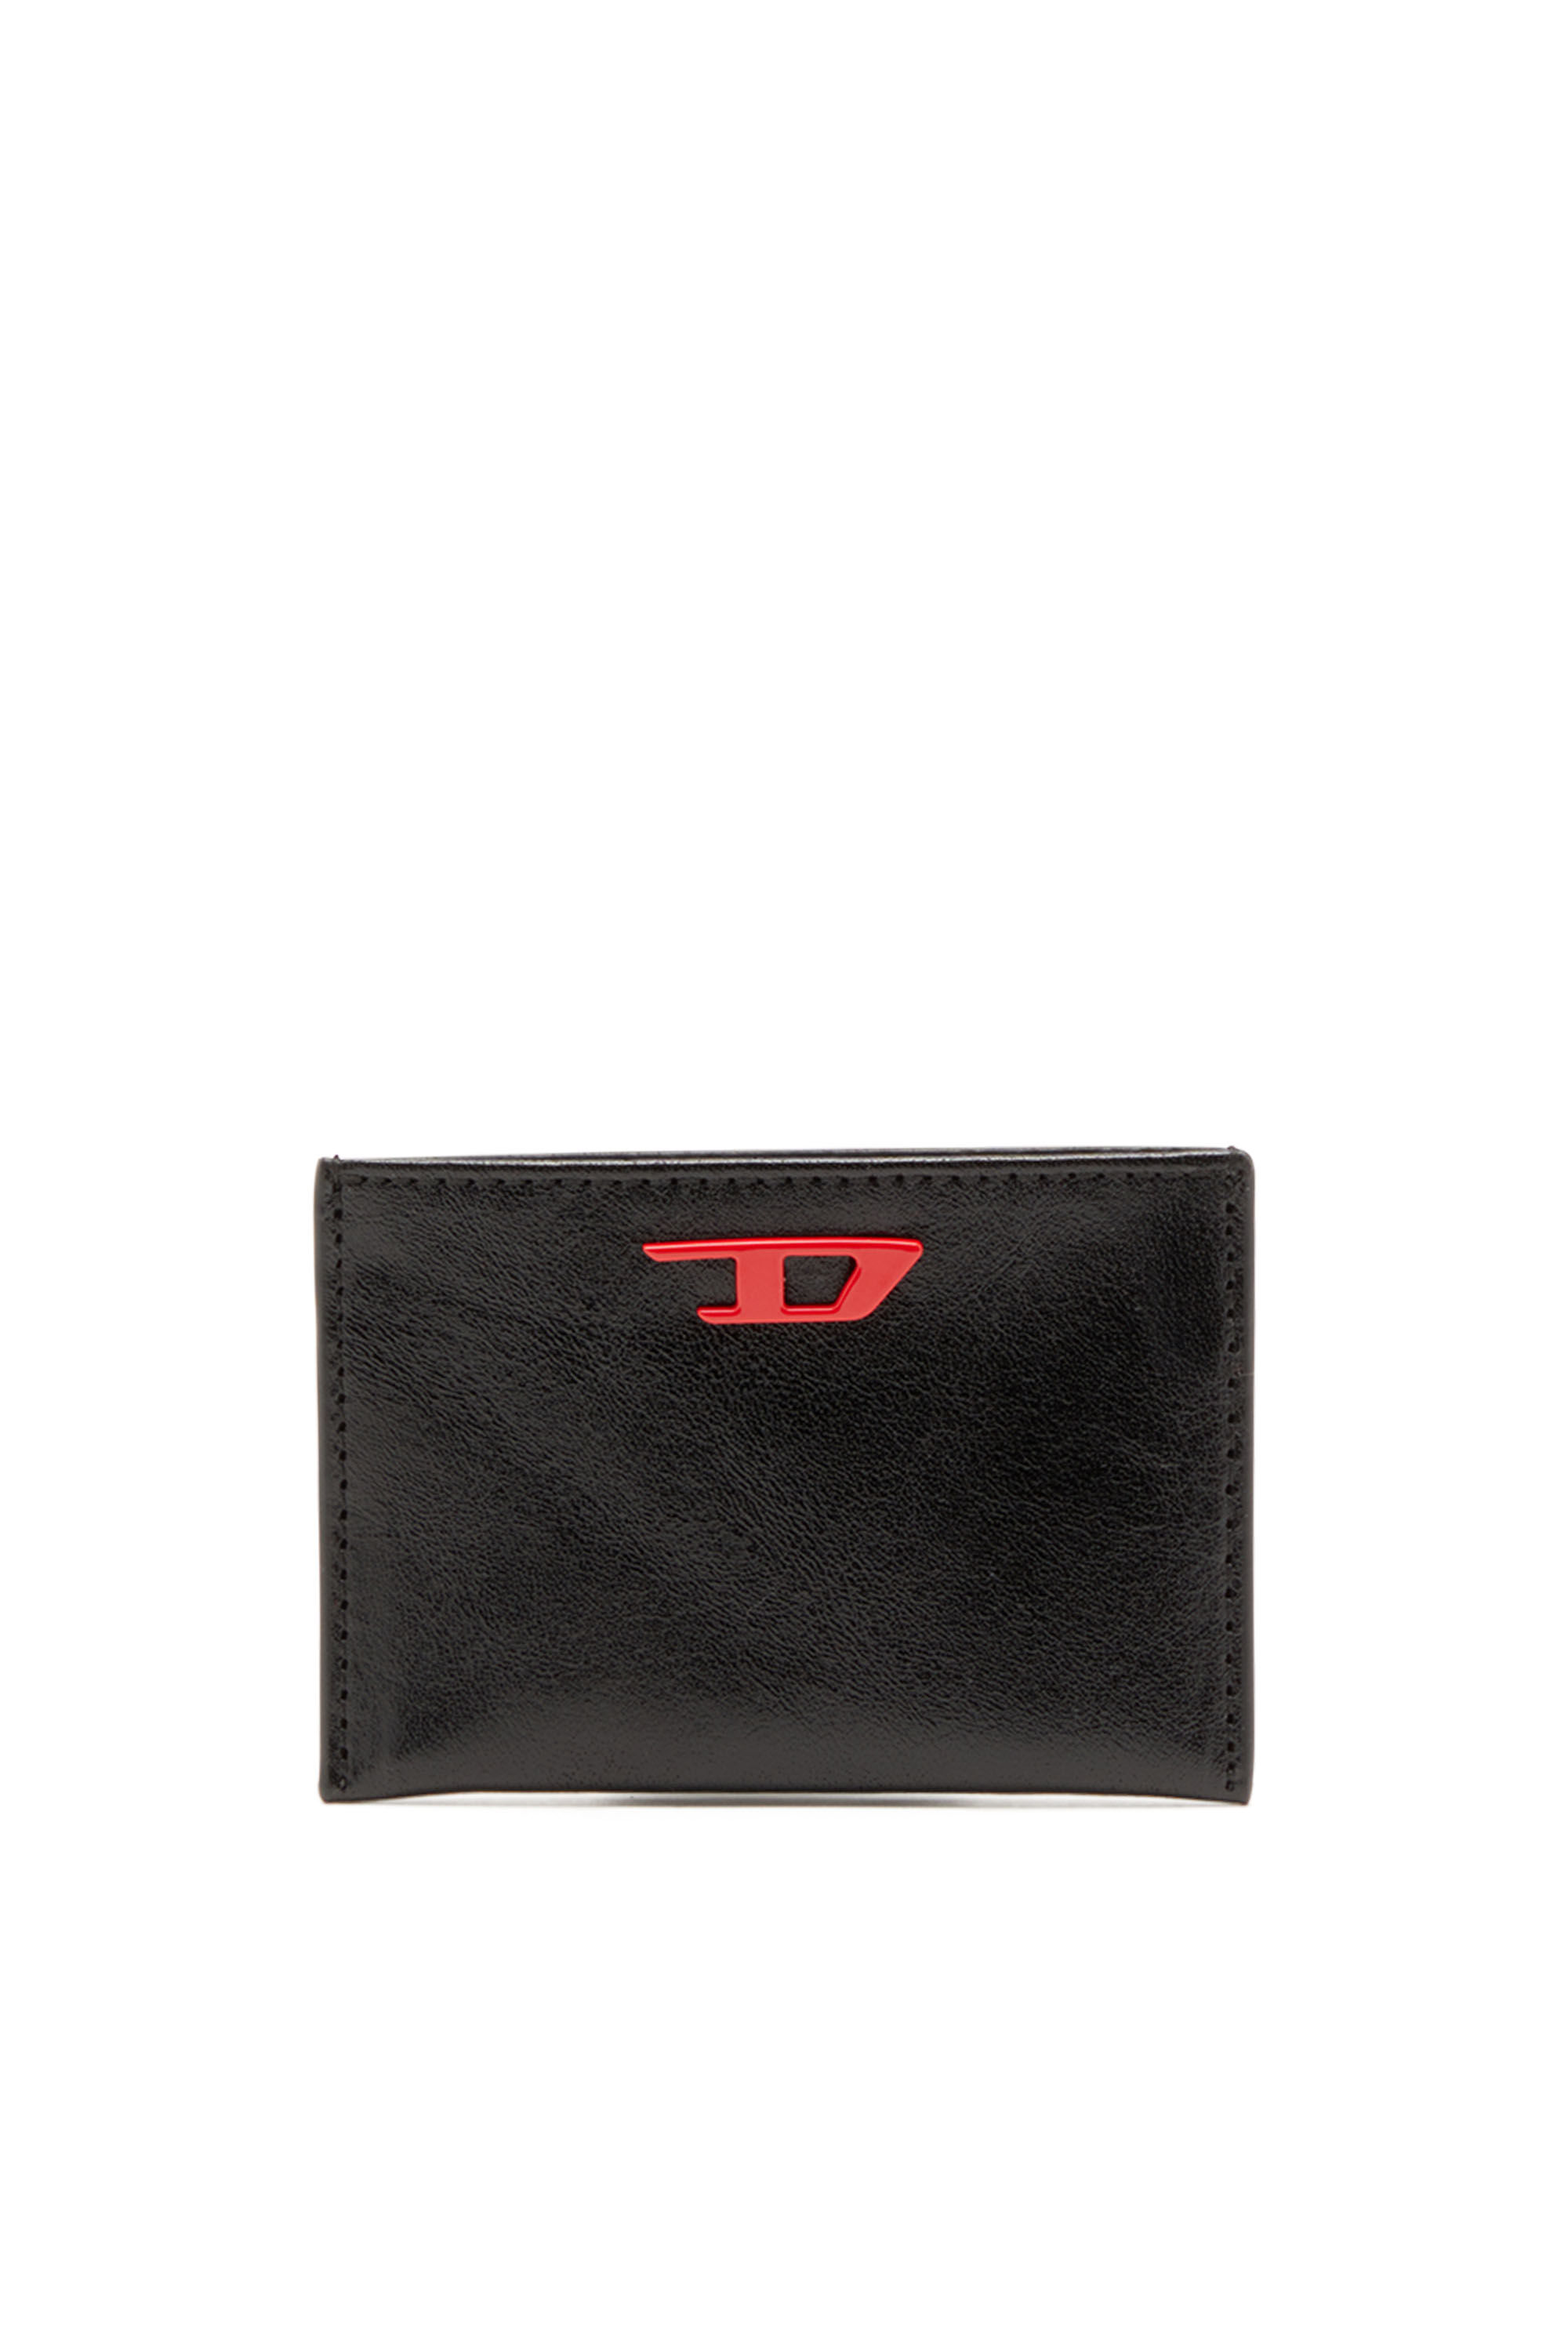 Diesel - RAVE CARD CASE, Male Leather card holder with red D plaque in ブラック - Image 1